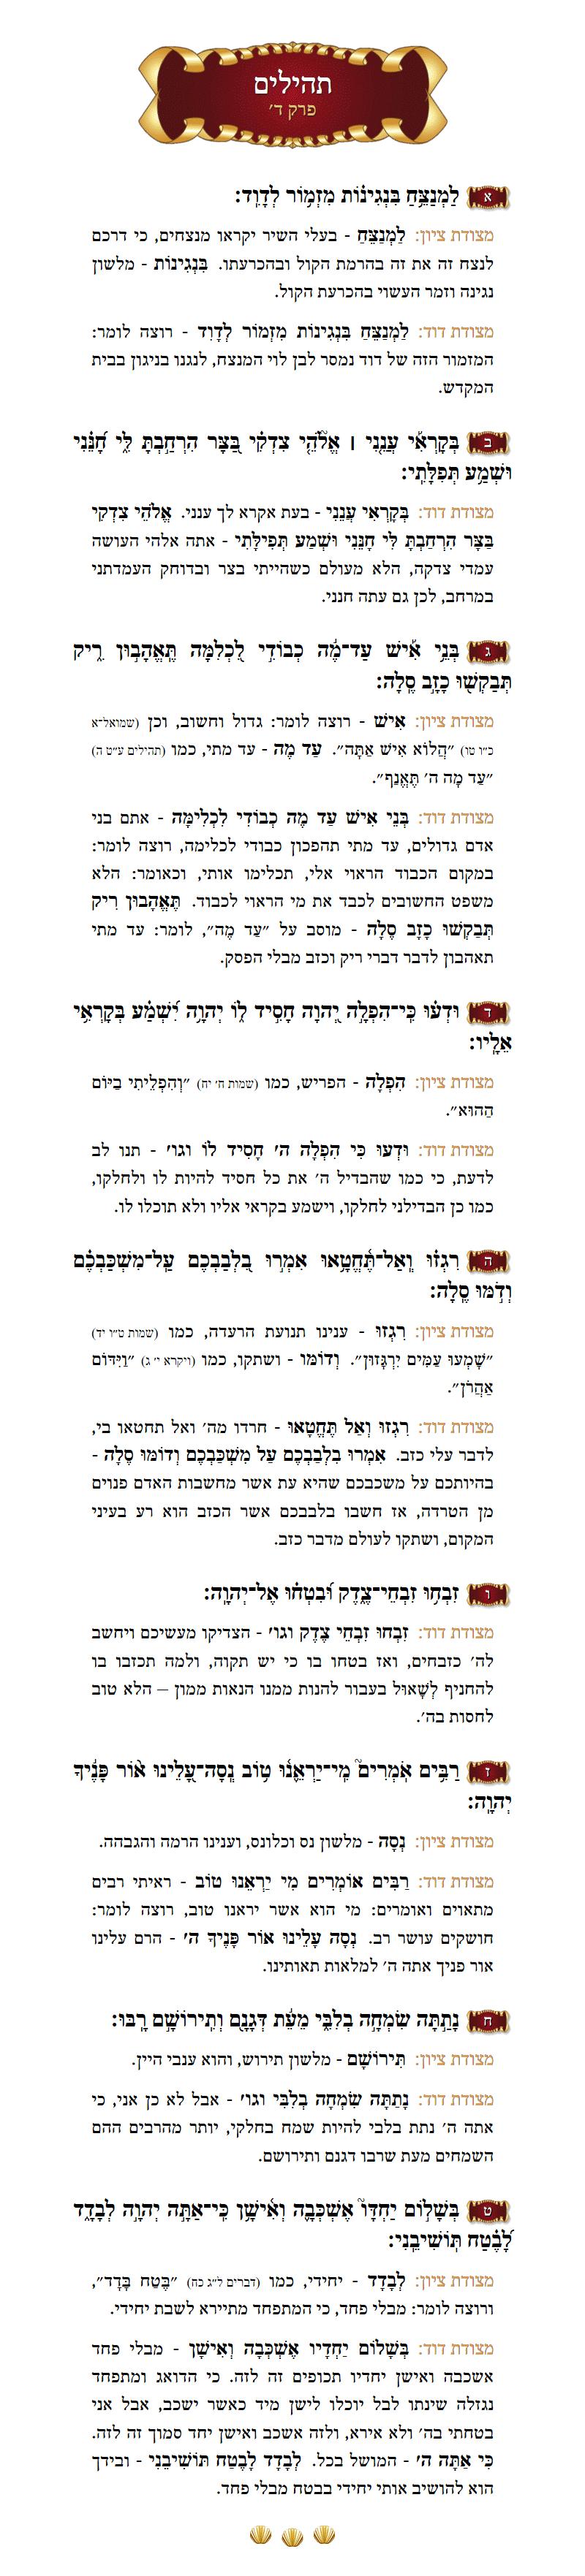 Sefer Tehillim Chapter 4 with commentary